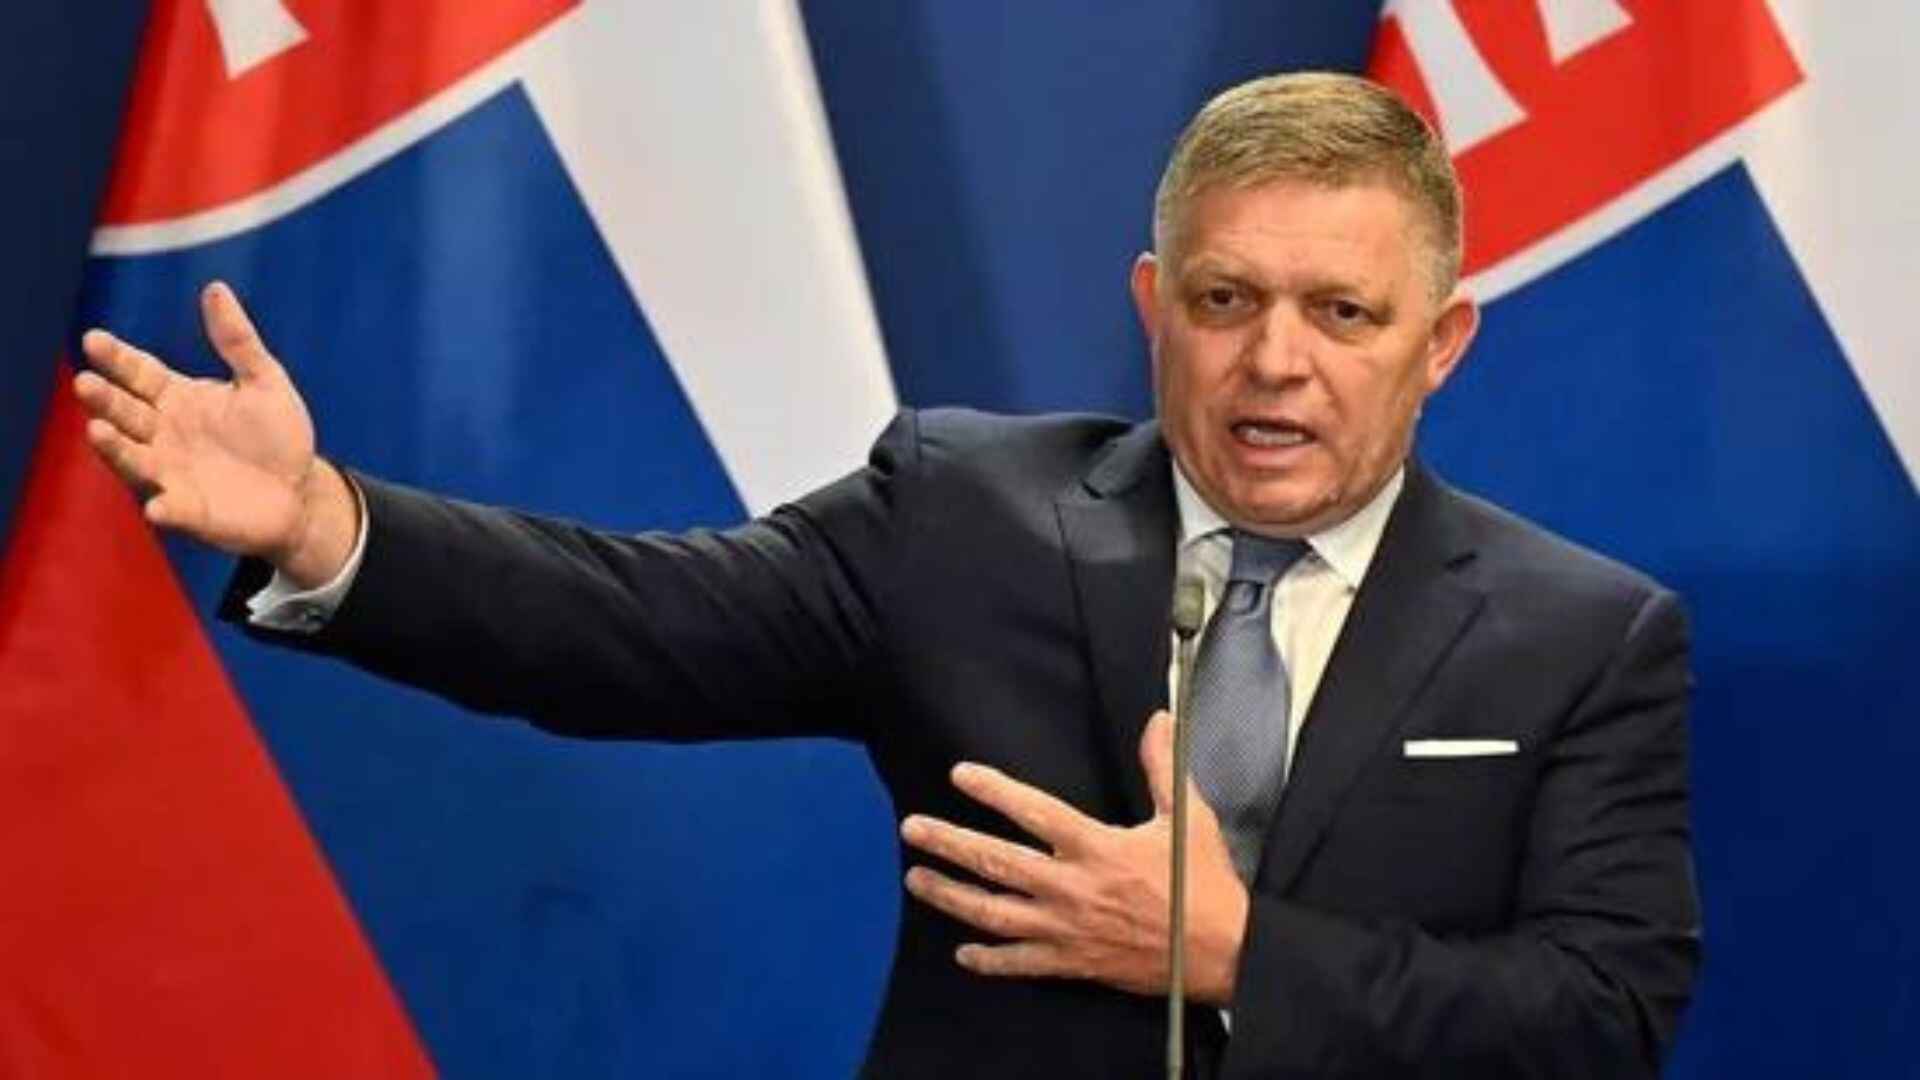 Slovakian PM Robert Fico In ‘Life-Threatening Condition’ Following ‘Assassination Attempt’